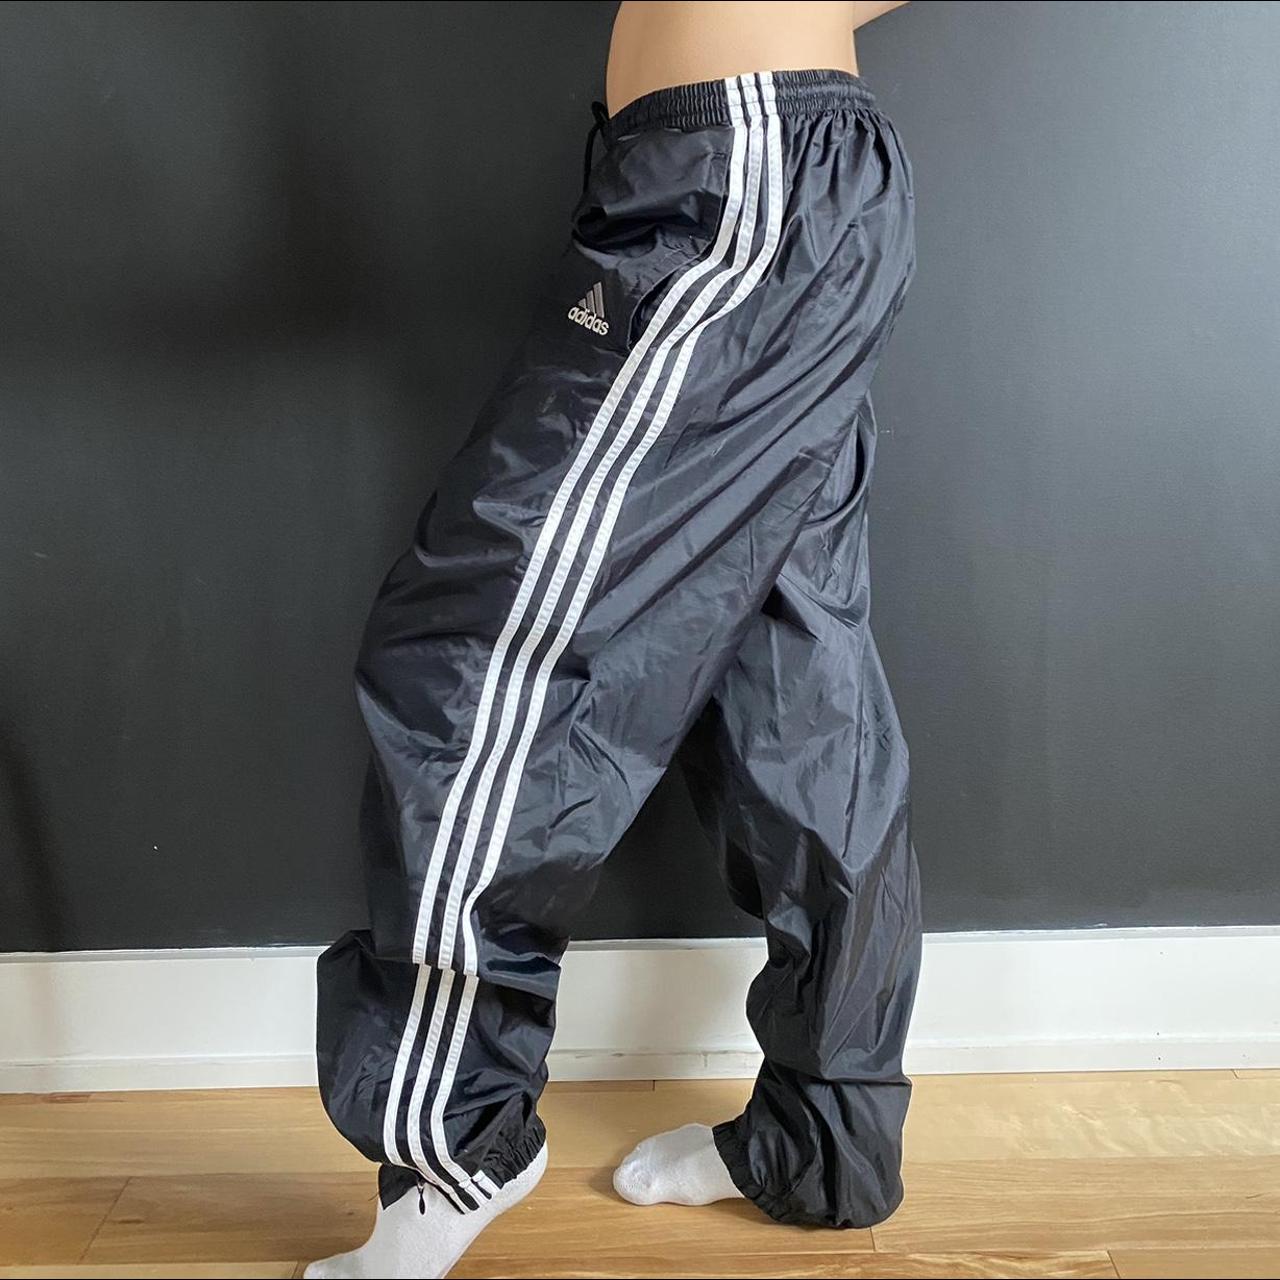 Adidas Women's White and Black Trousers